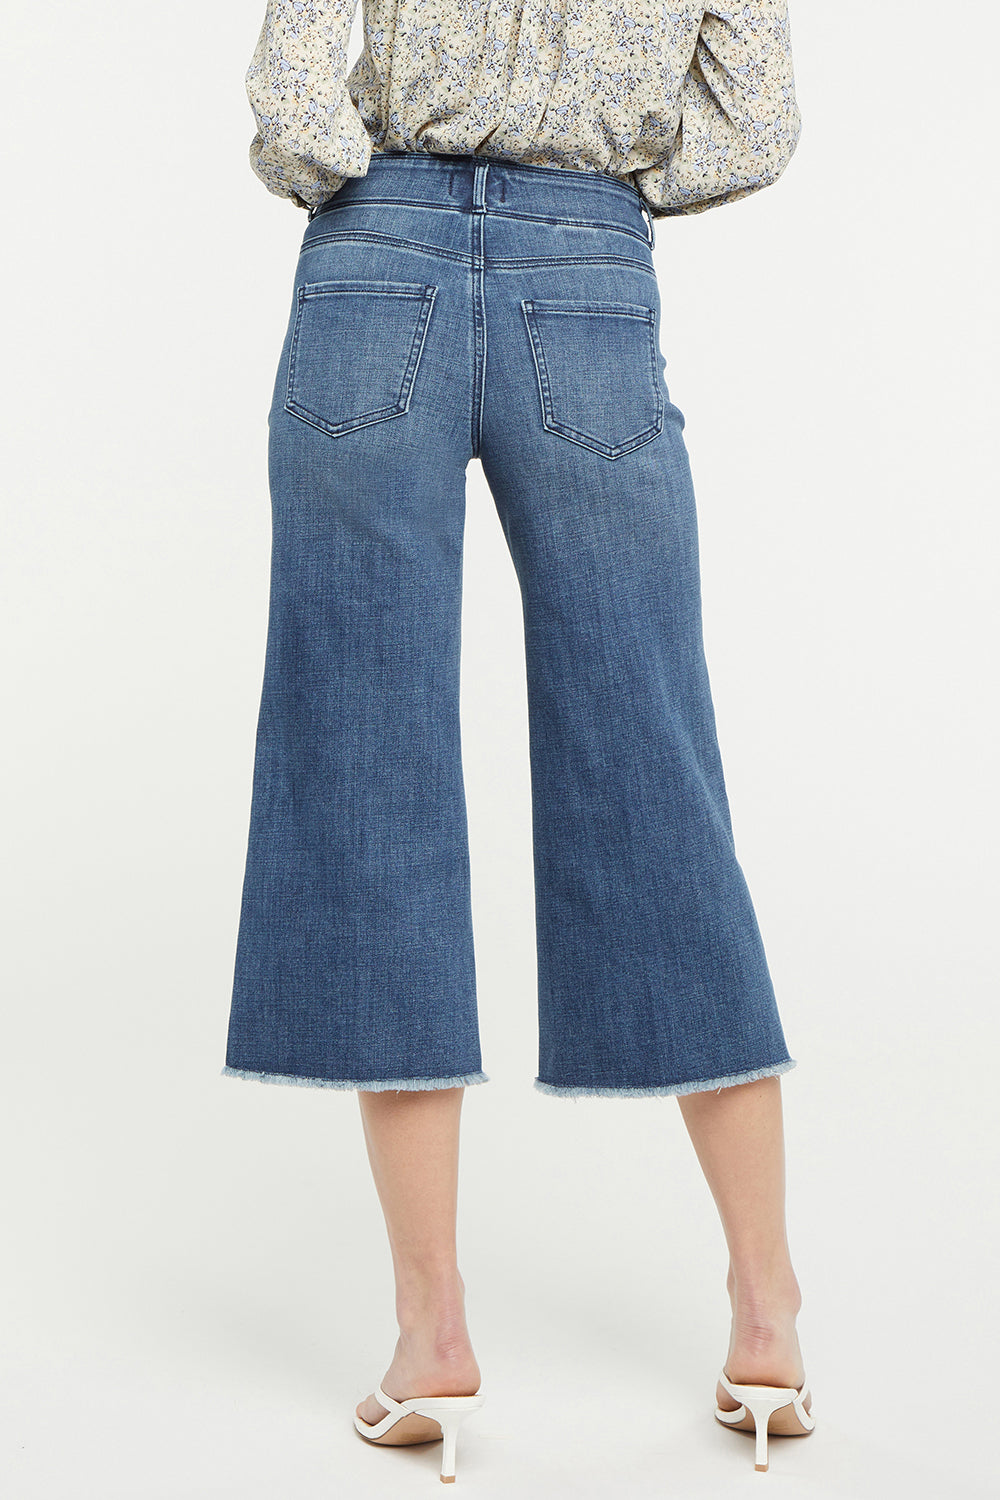 NYDJ Wide Leg Capri Jeans In Petite With High Rise And Frayed Hems - Caliente